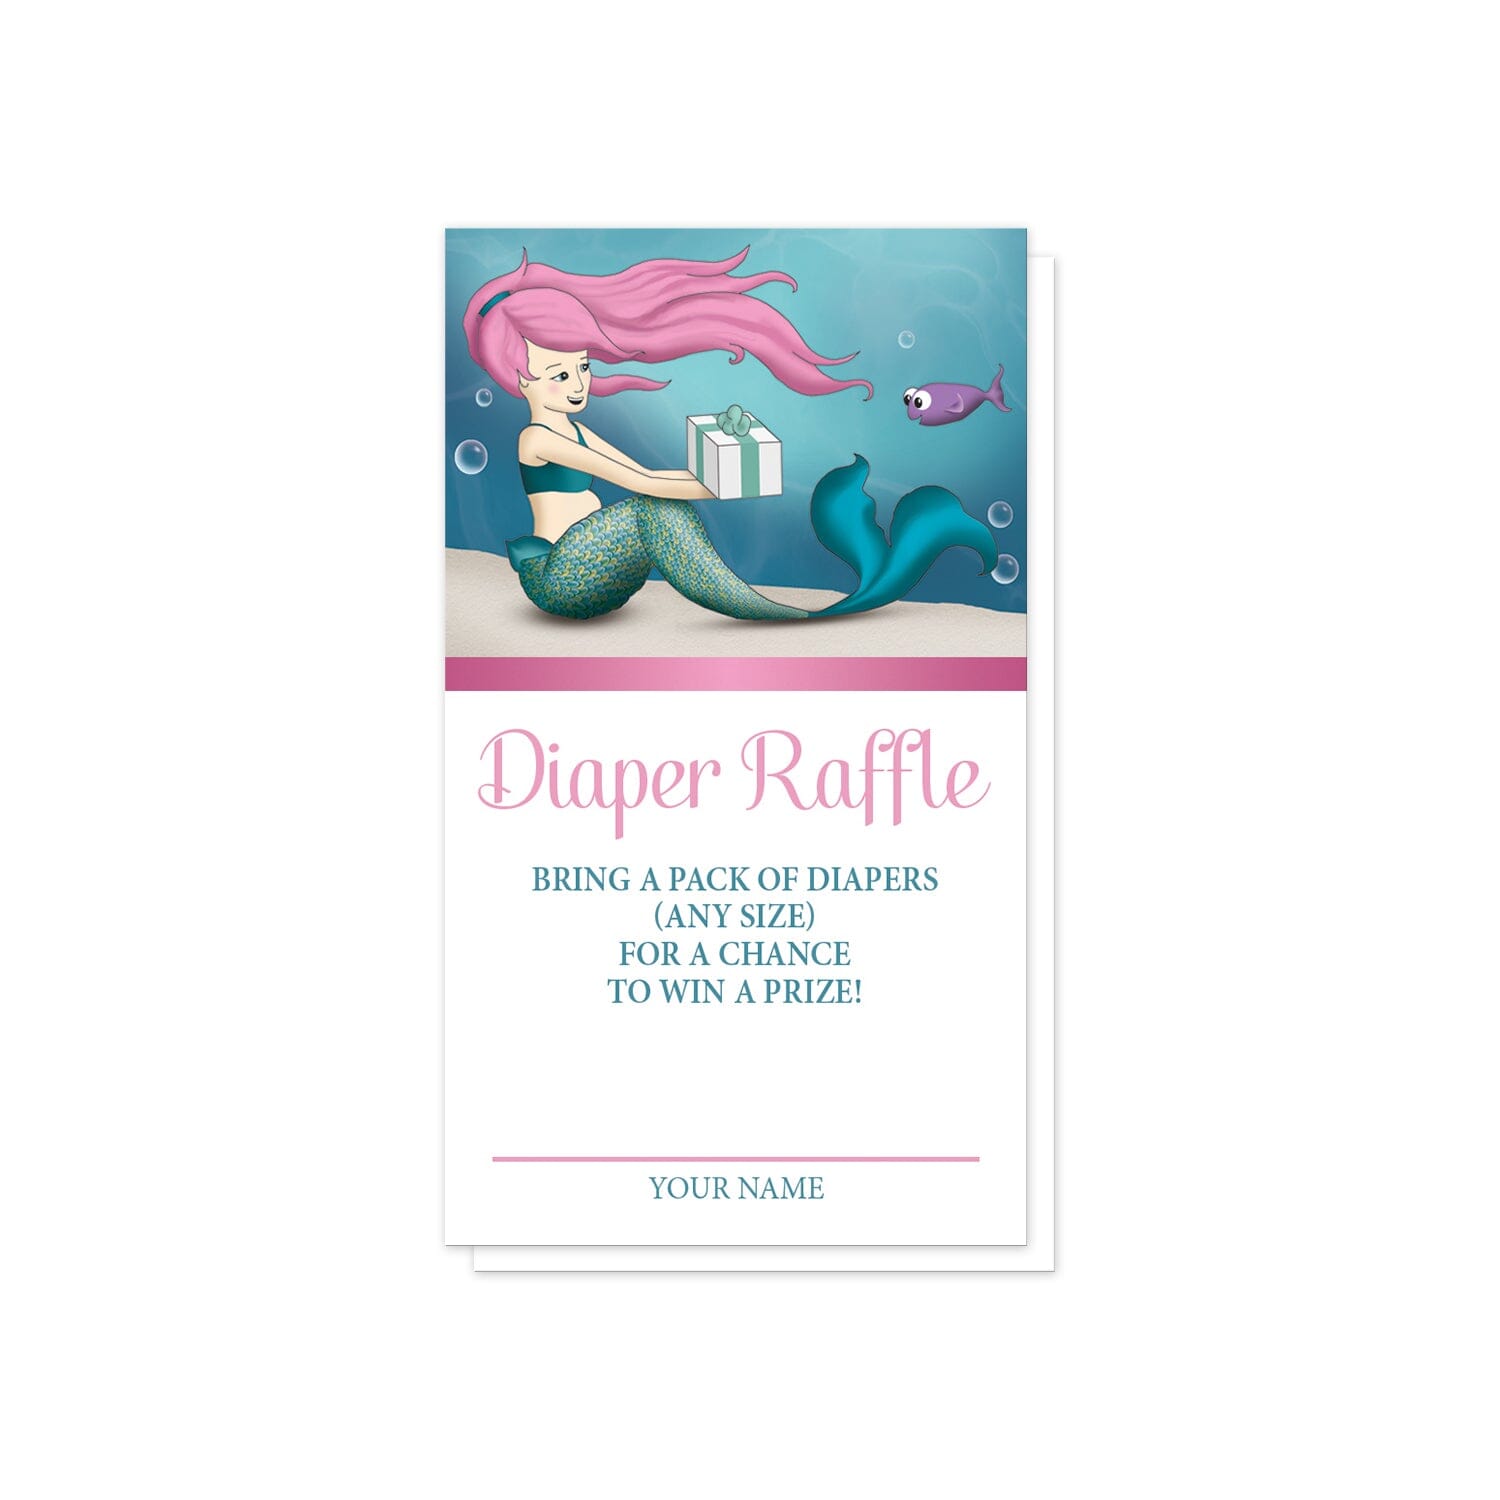 Under the Sea Mermaid Diaper Raffle Cards at Artistically Invited. Uniquely illustrated under the sea mermaid diaper raffle cards designed with an expecting mermaid with pink hair receiving a gift from a happy little purple fish at the top. Your diaper raffle details are printed in pink and turquoise on white below the mermaid design.